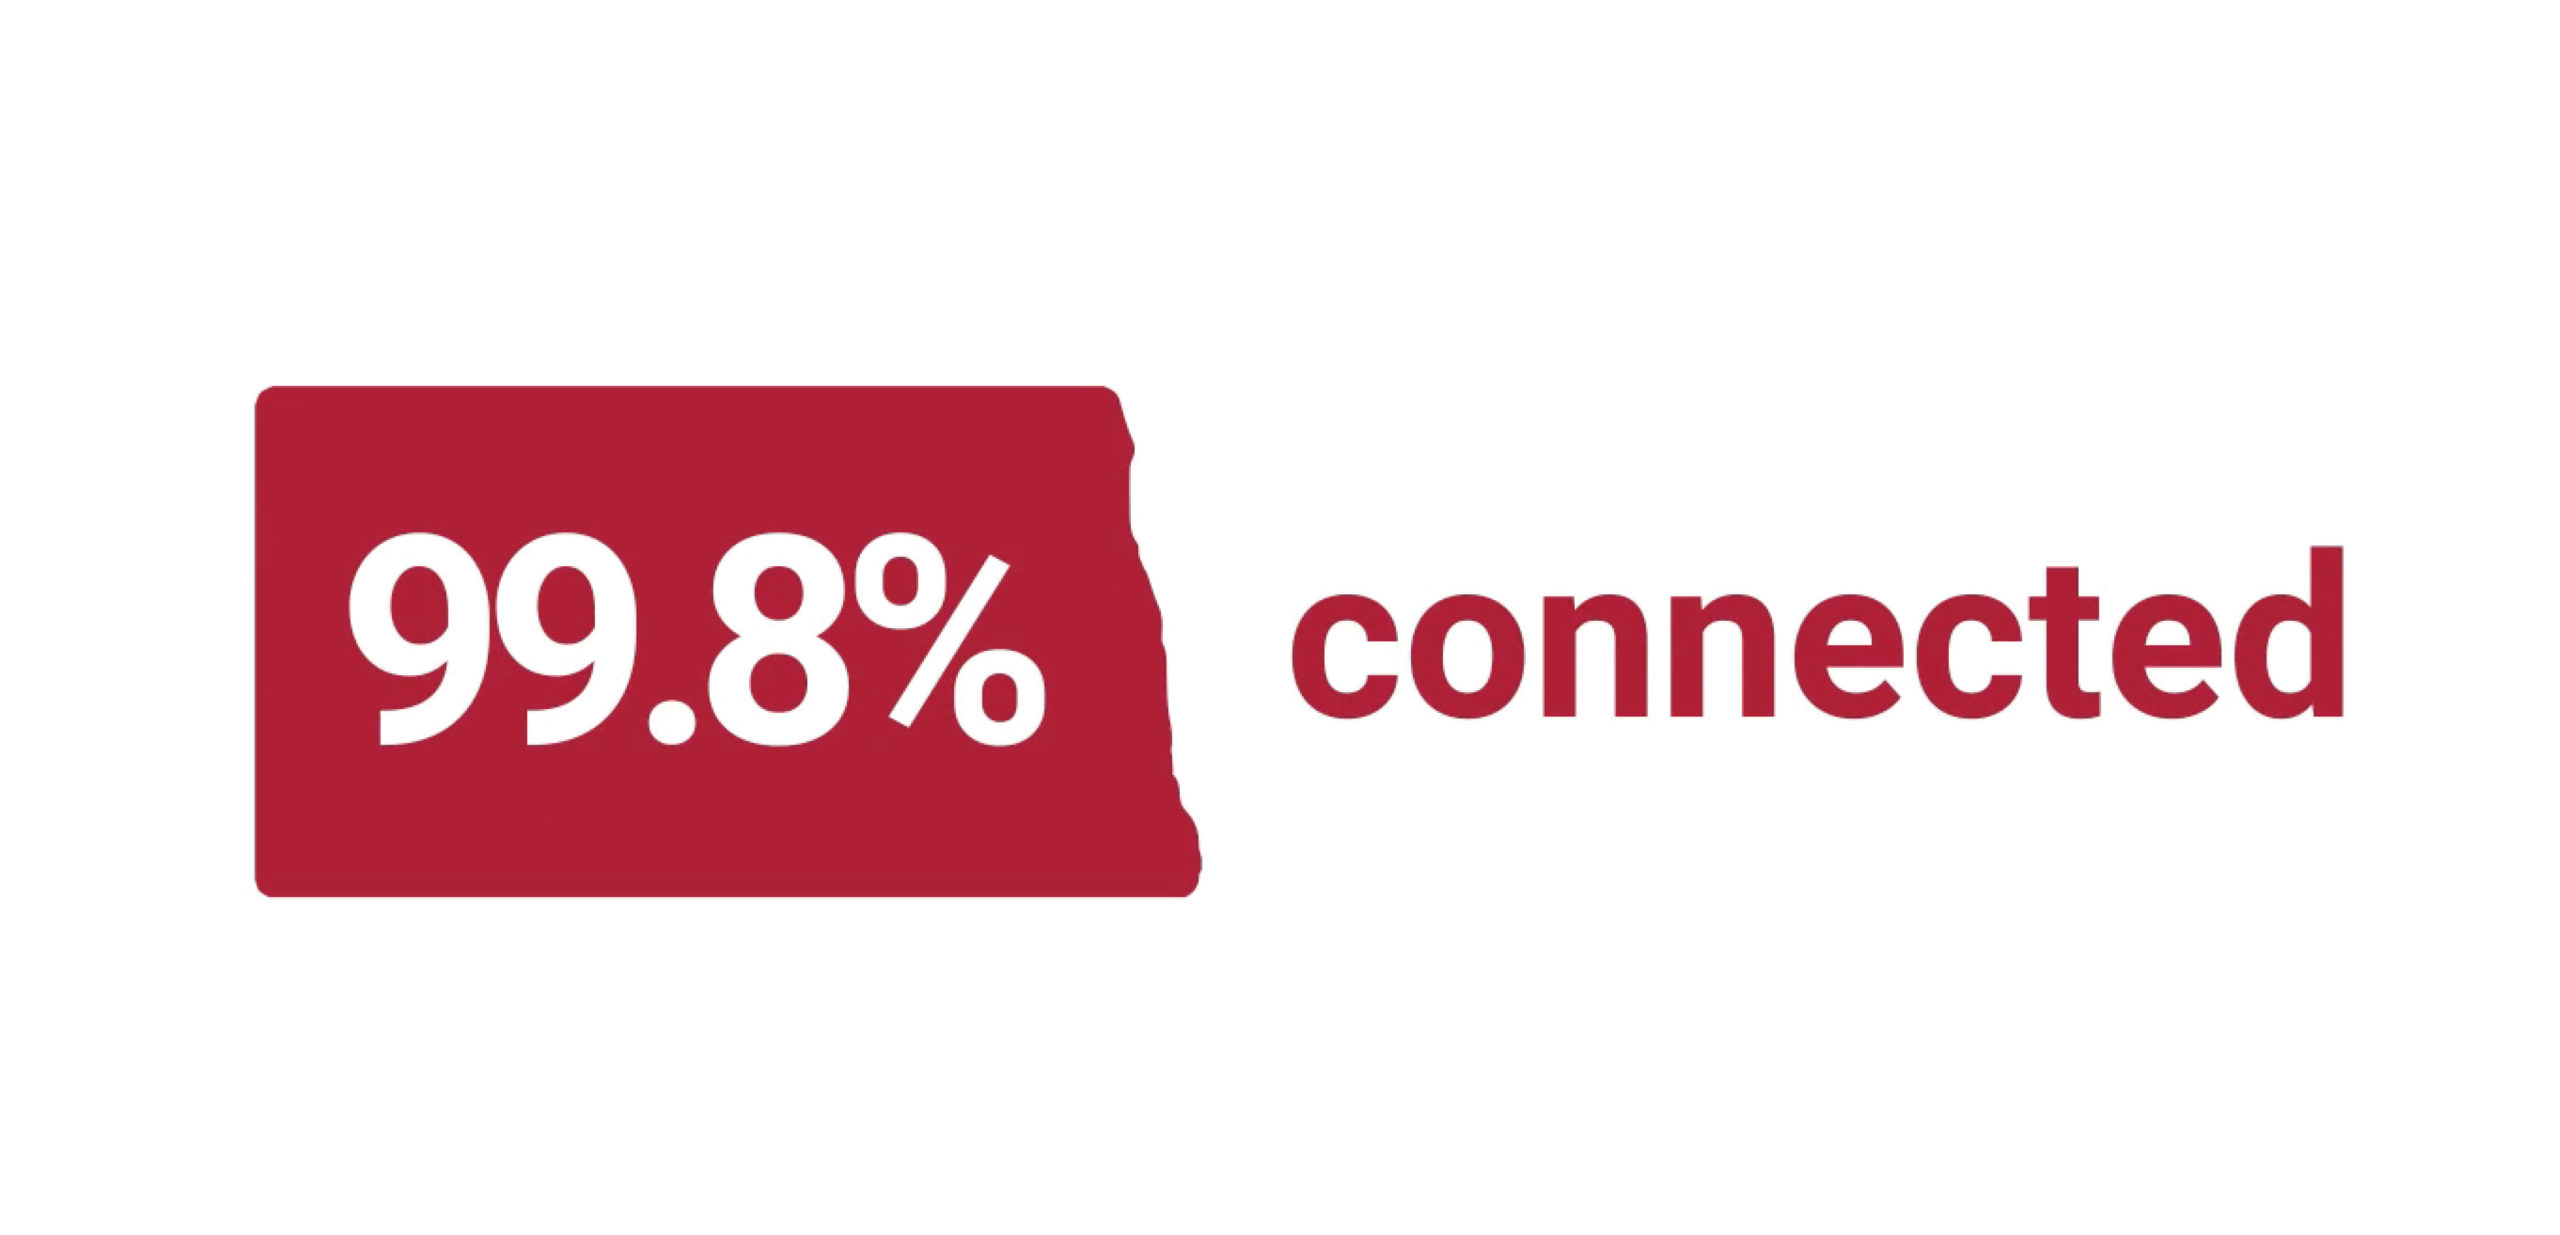 99.8% connected